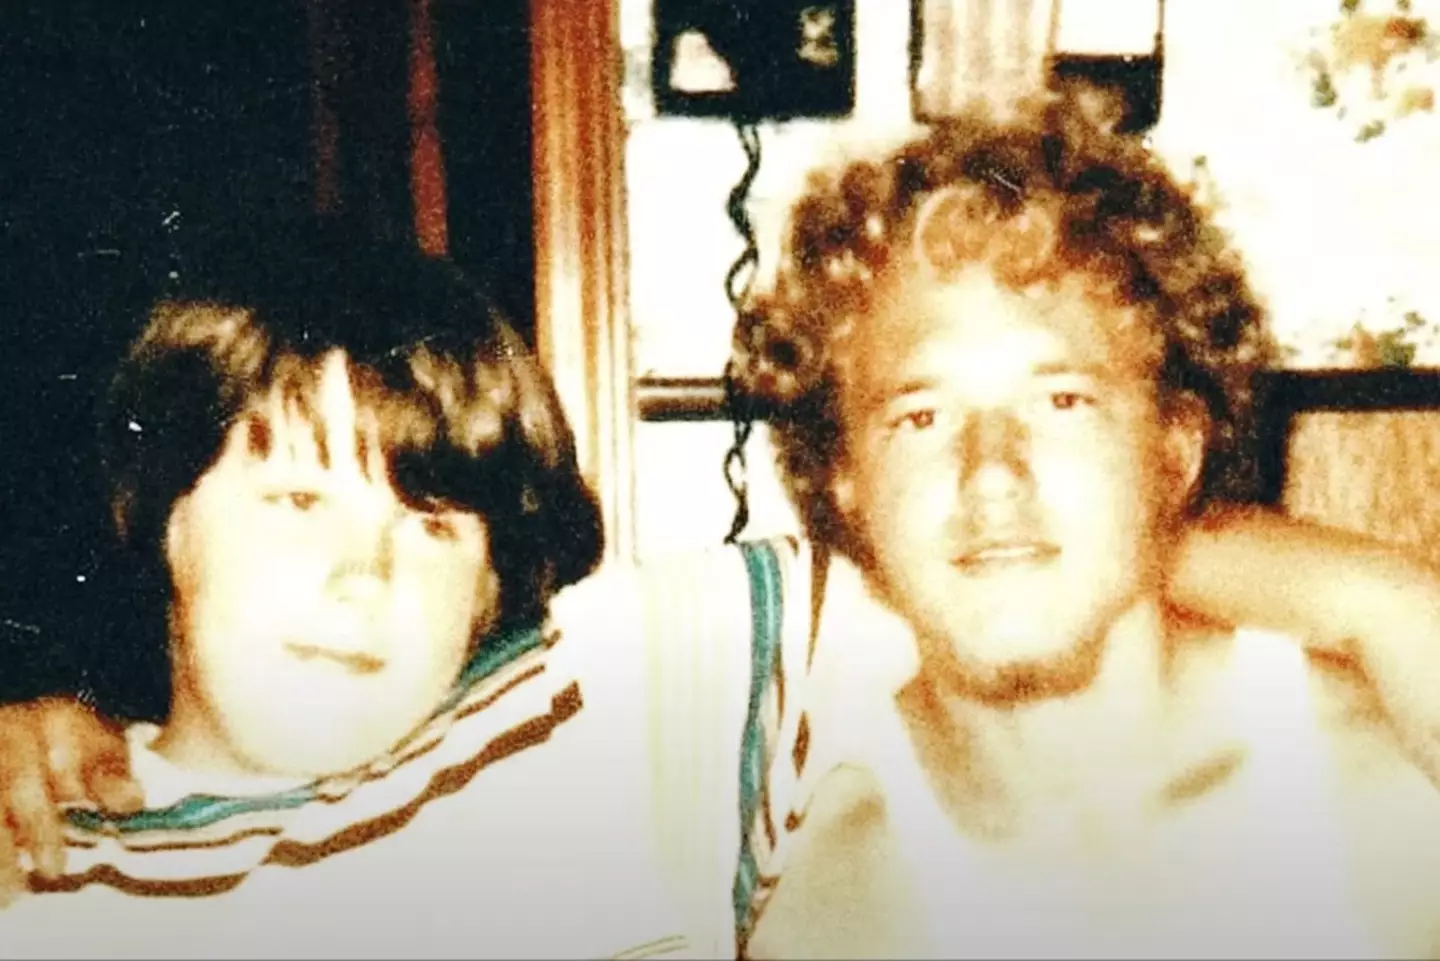 The documentary tells the story of two demonic possessions experienced by David Glatzel (left) and Arne Cheyenne Johnson (right).